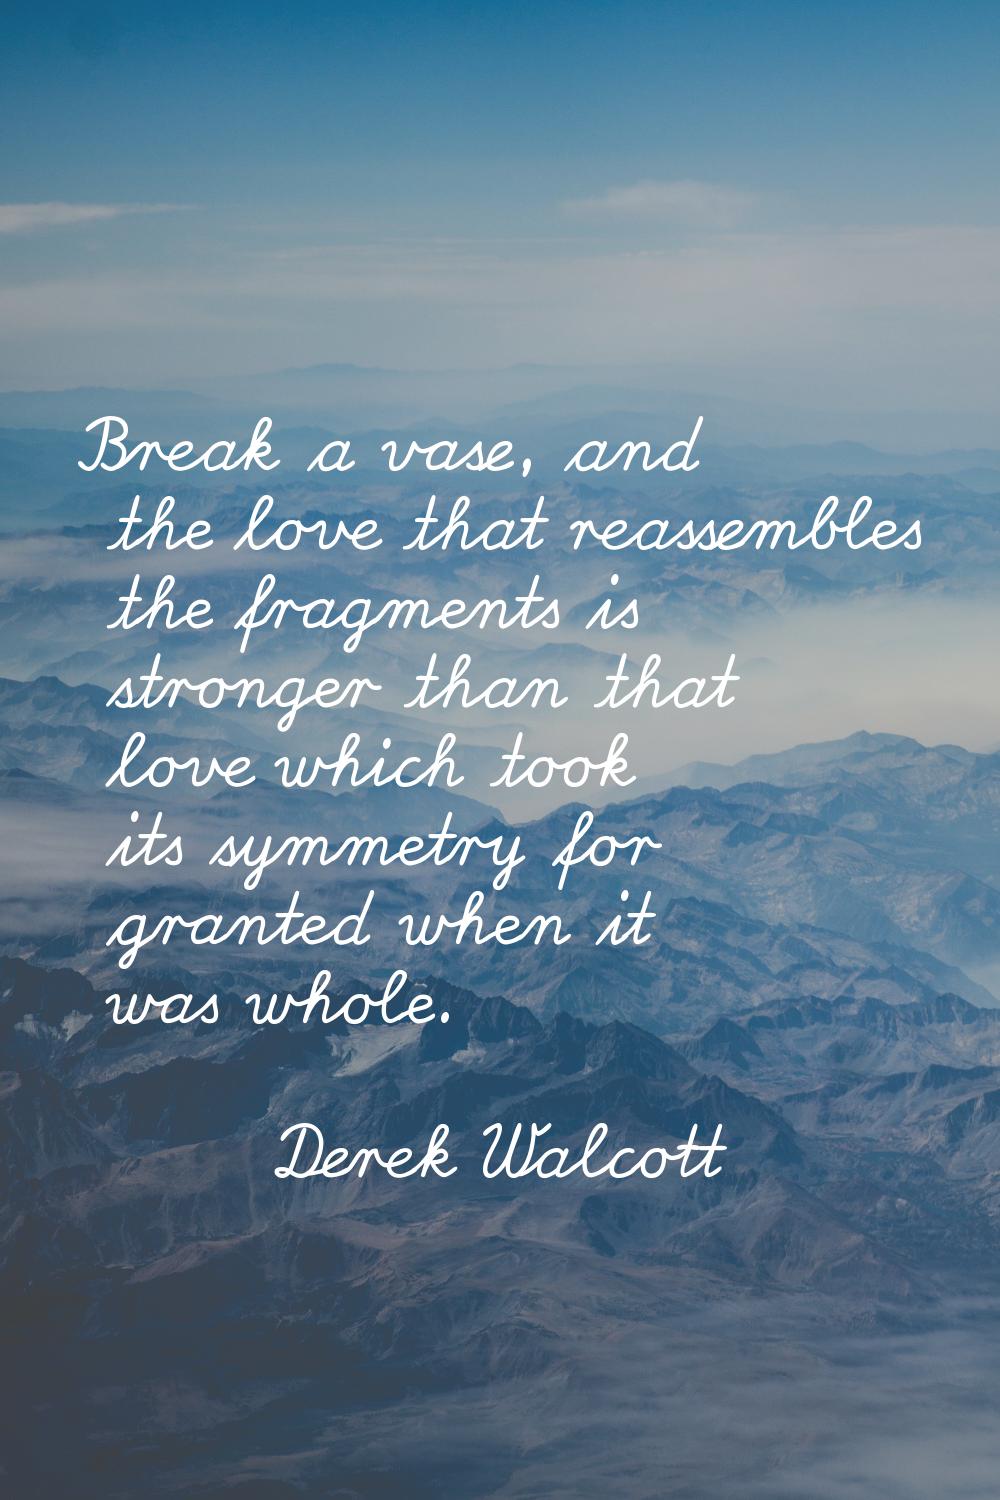 Break a vase, and the love that reassembles the fragments is stronger than that love which took its